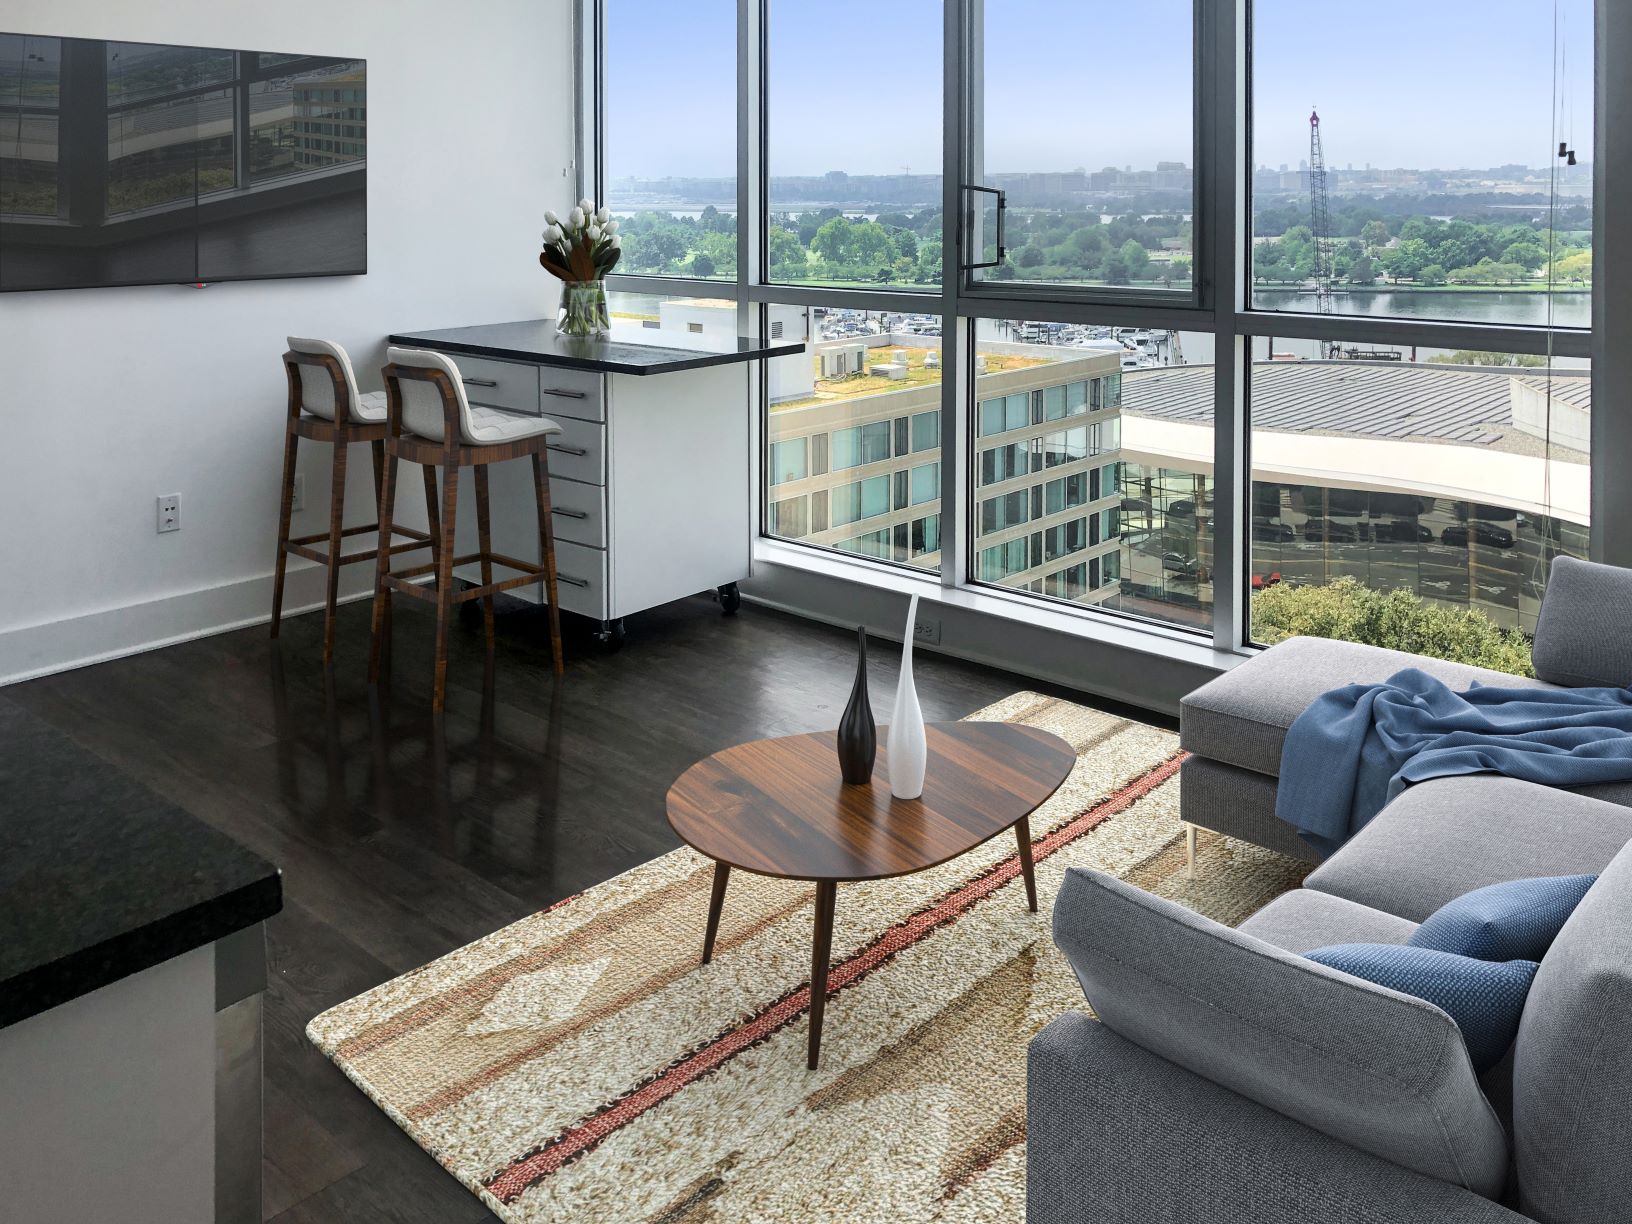 100 Best Apartments In Washington Dc With Pictures